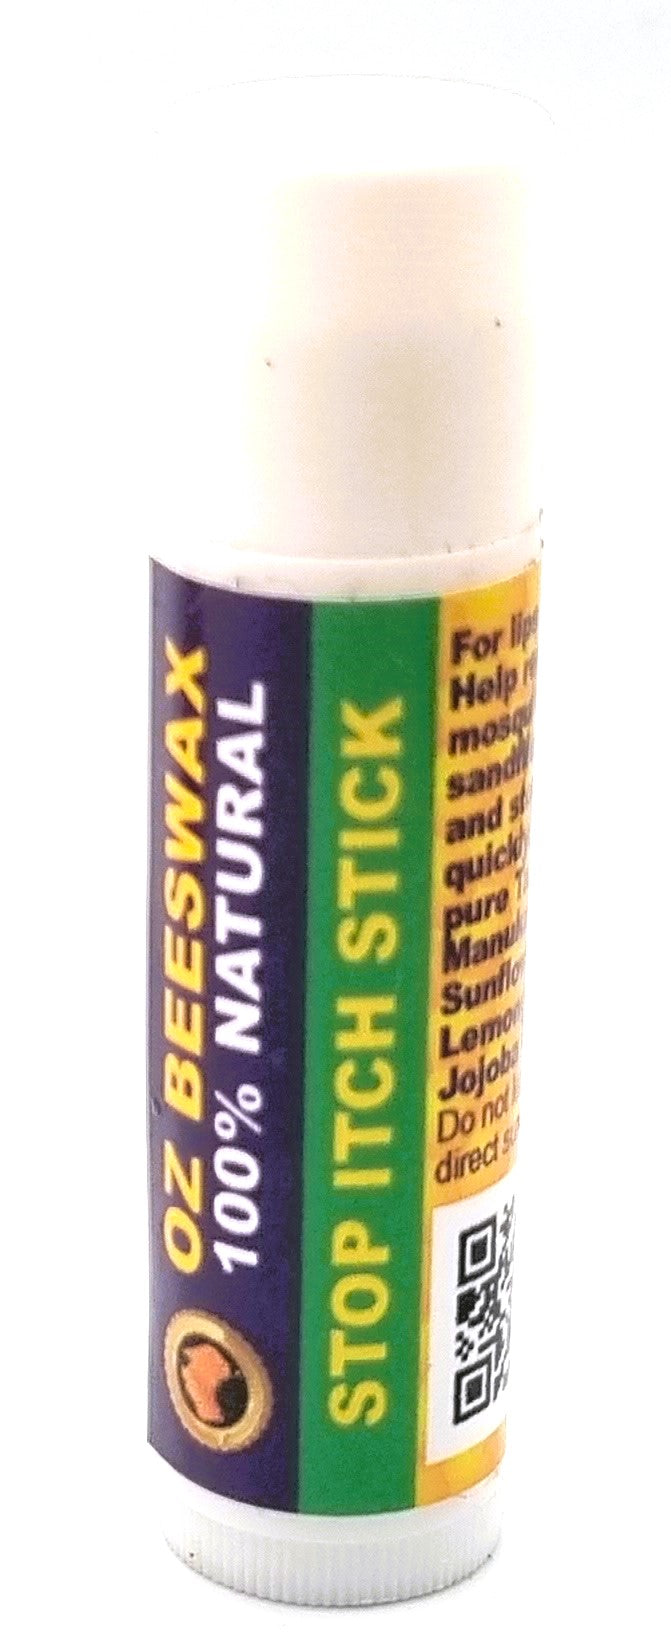 Stop Itch Stick